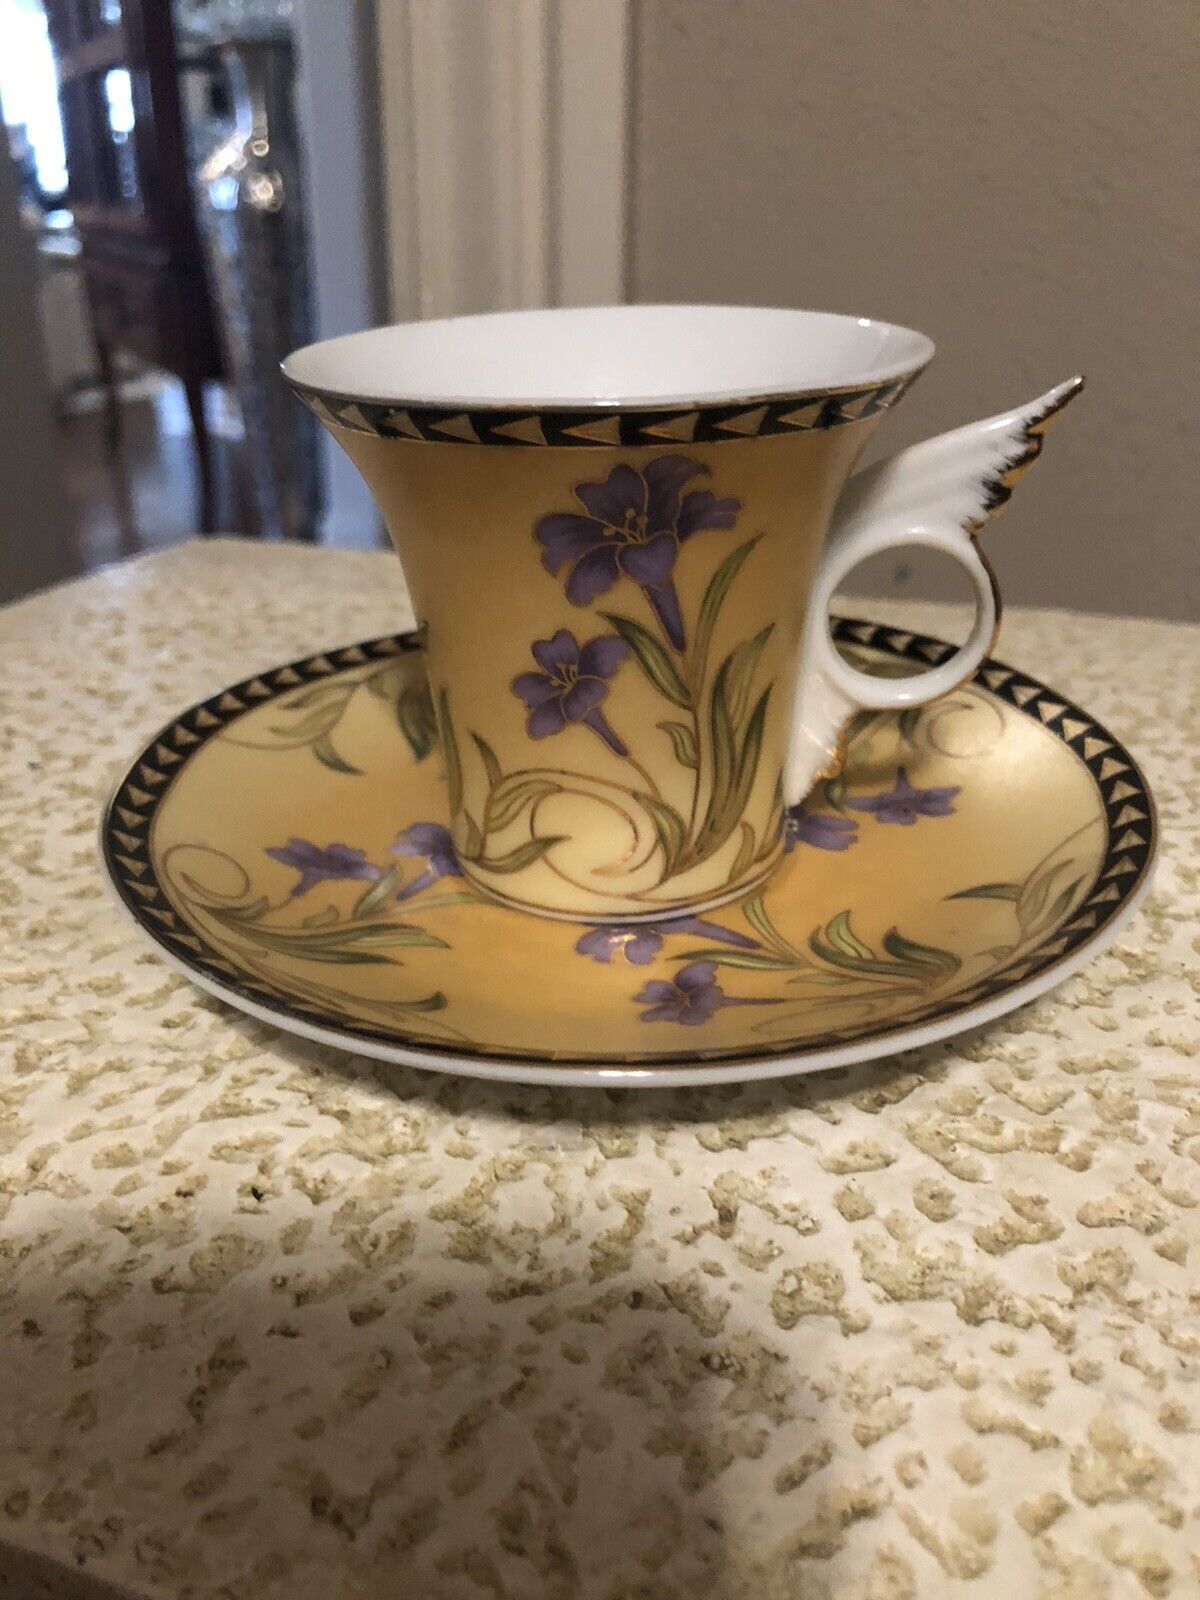 Imperial Italian Design by Antonio Cup & Saucer set Gorgeous Yellow/Purple/Gold